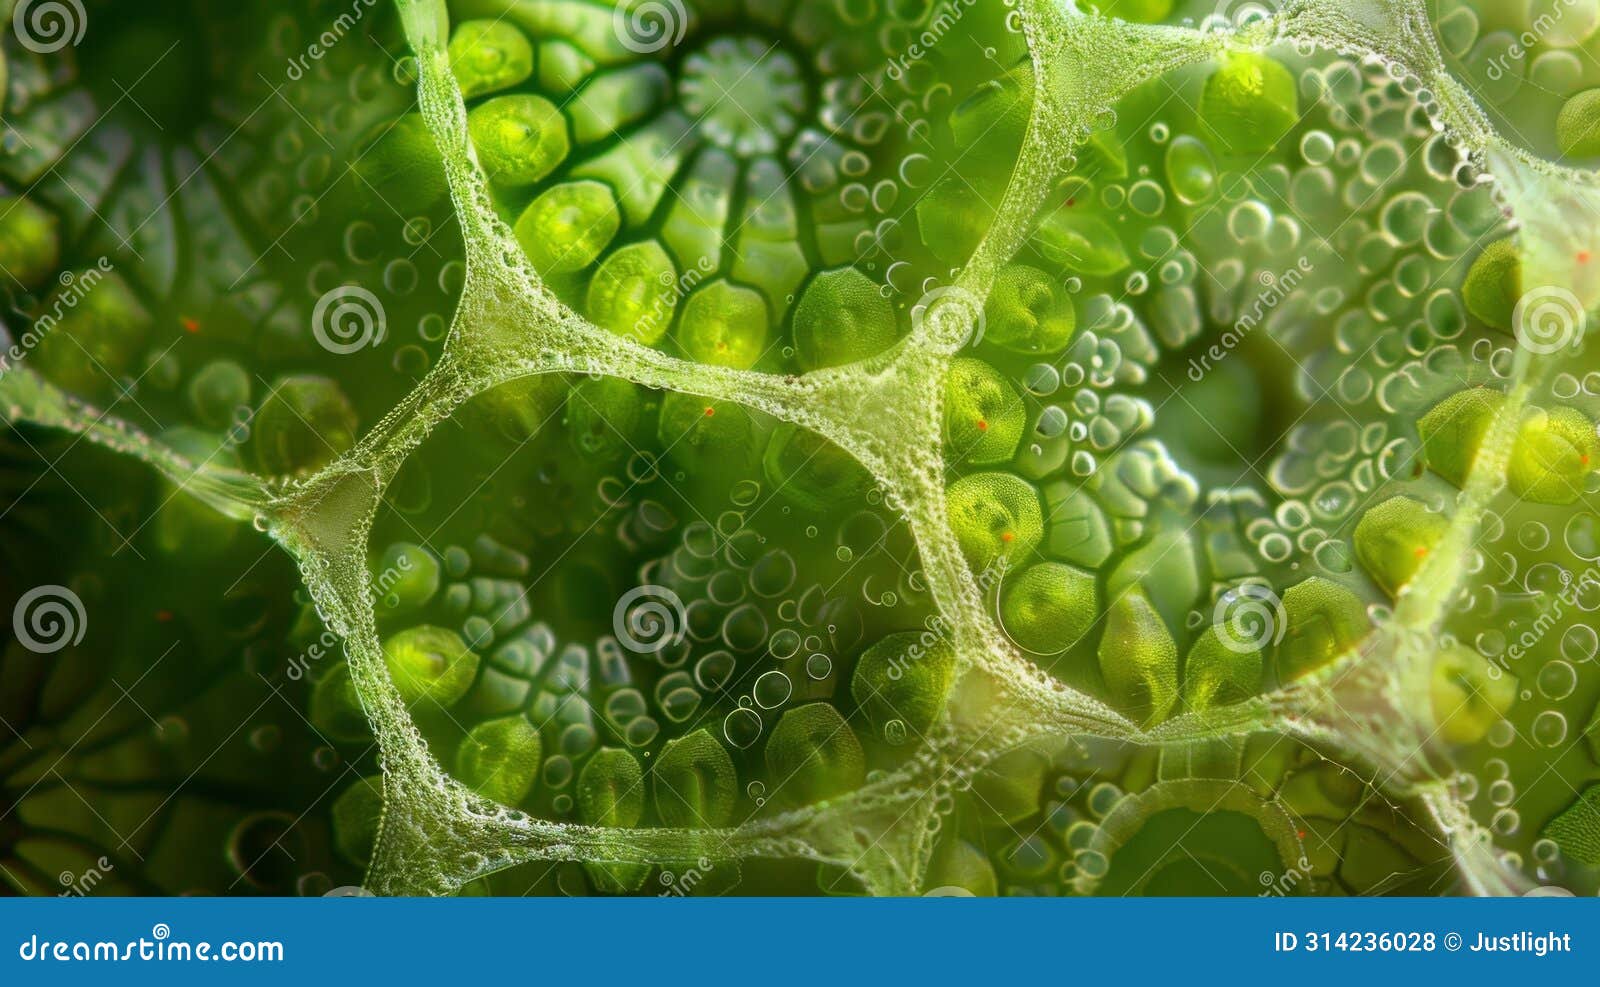 a zoomedin view of a plant cells vacuole the large and fluidfilled structure that stores water nutrients and waste